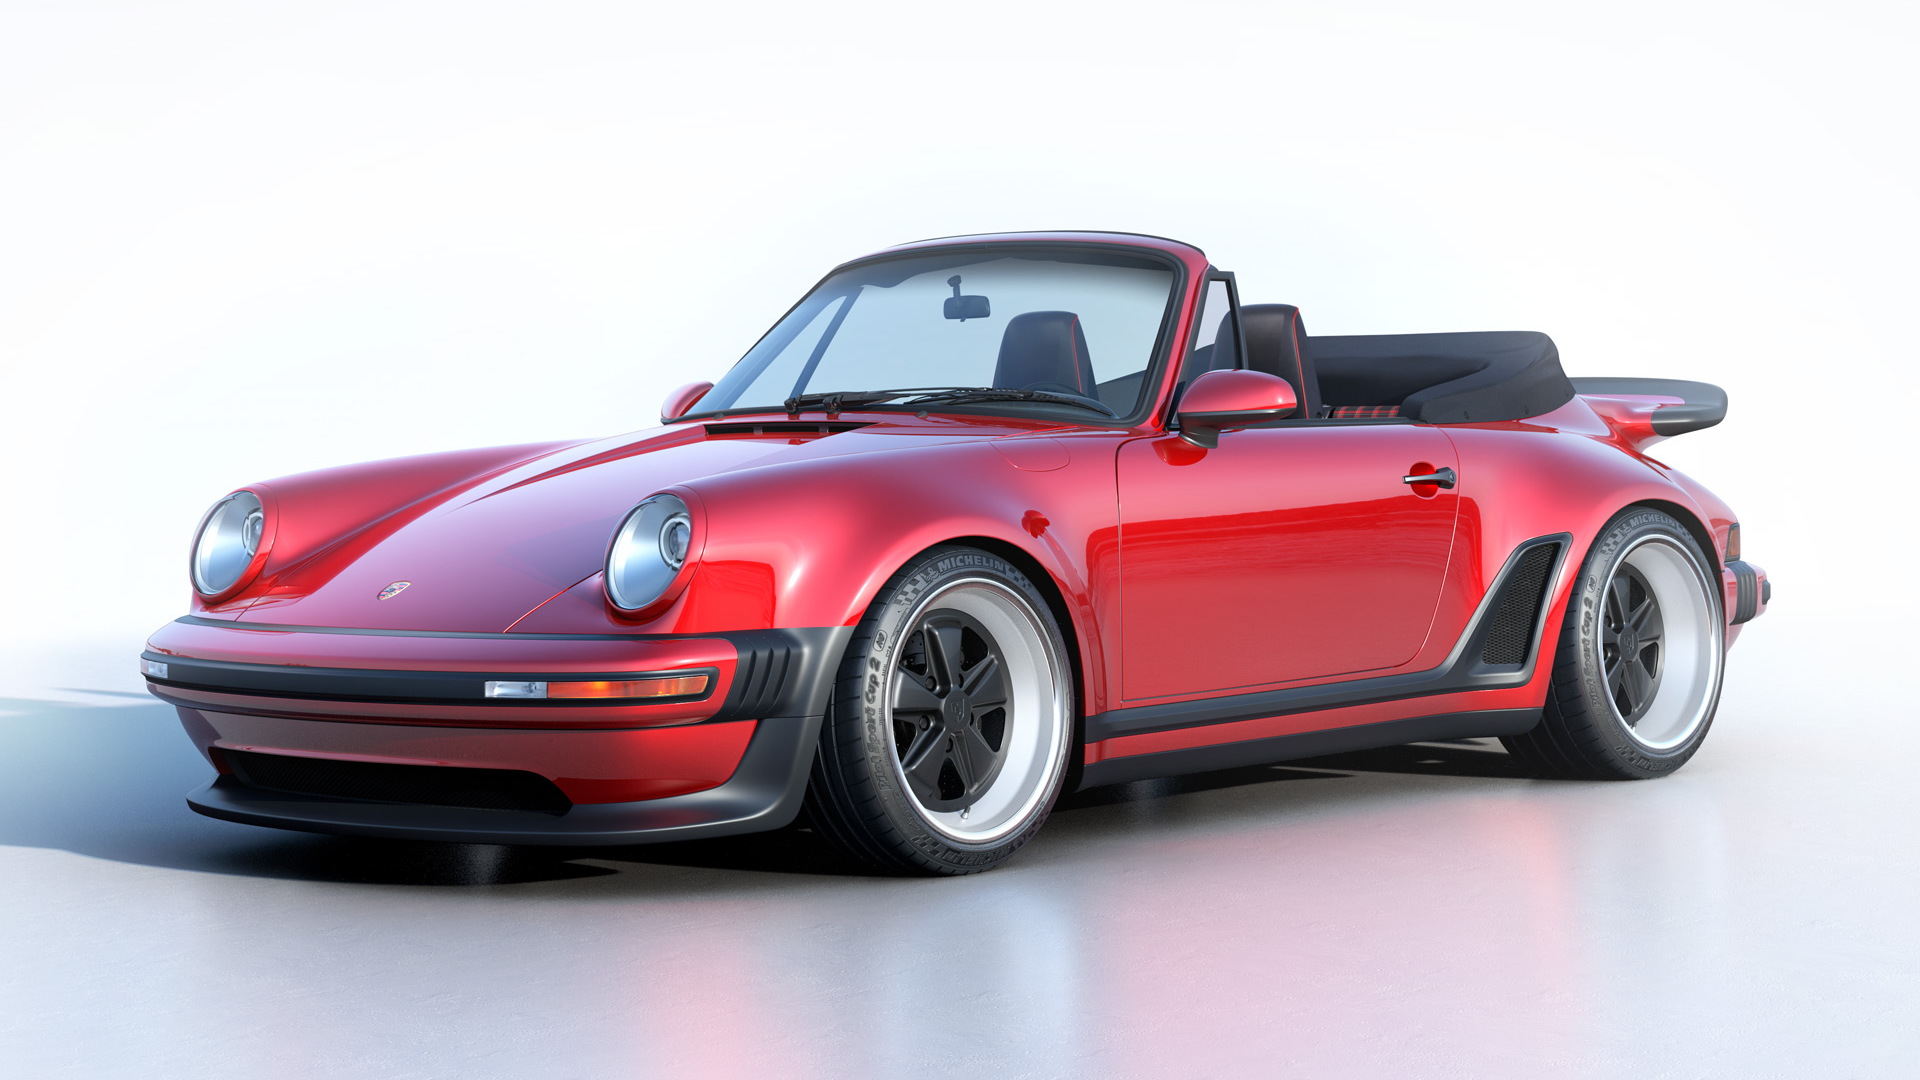 Singer Turbo Study with sports focus and convertible body style